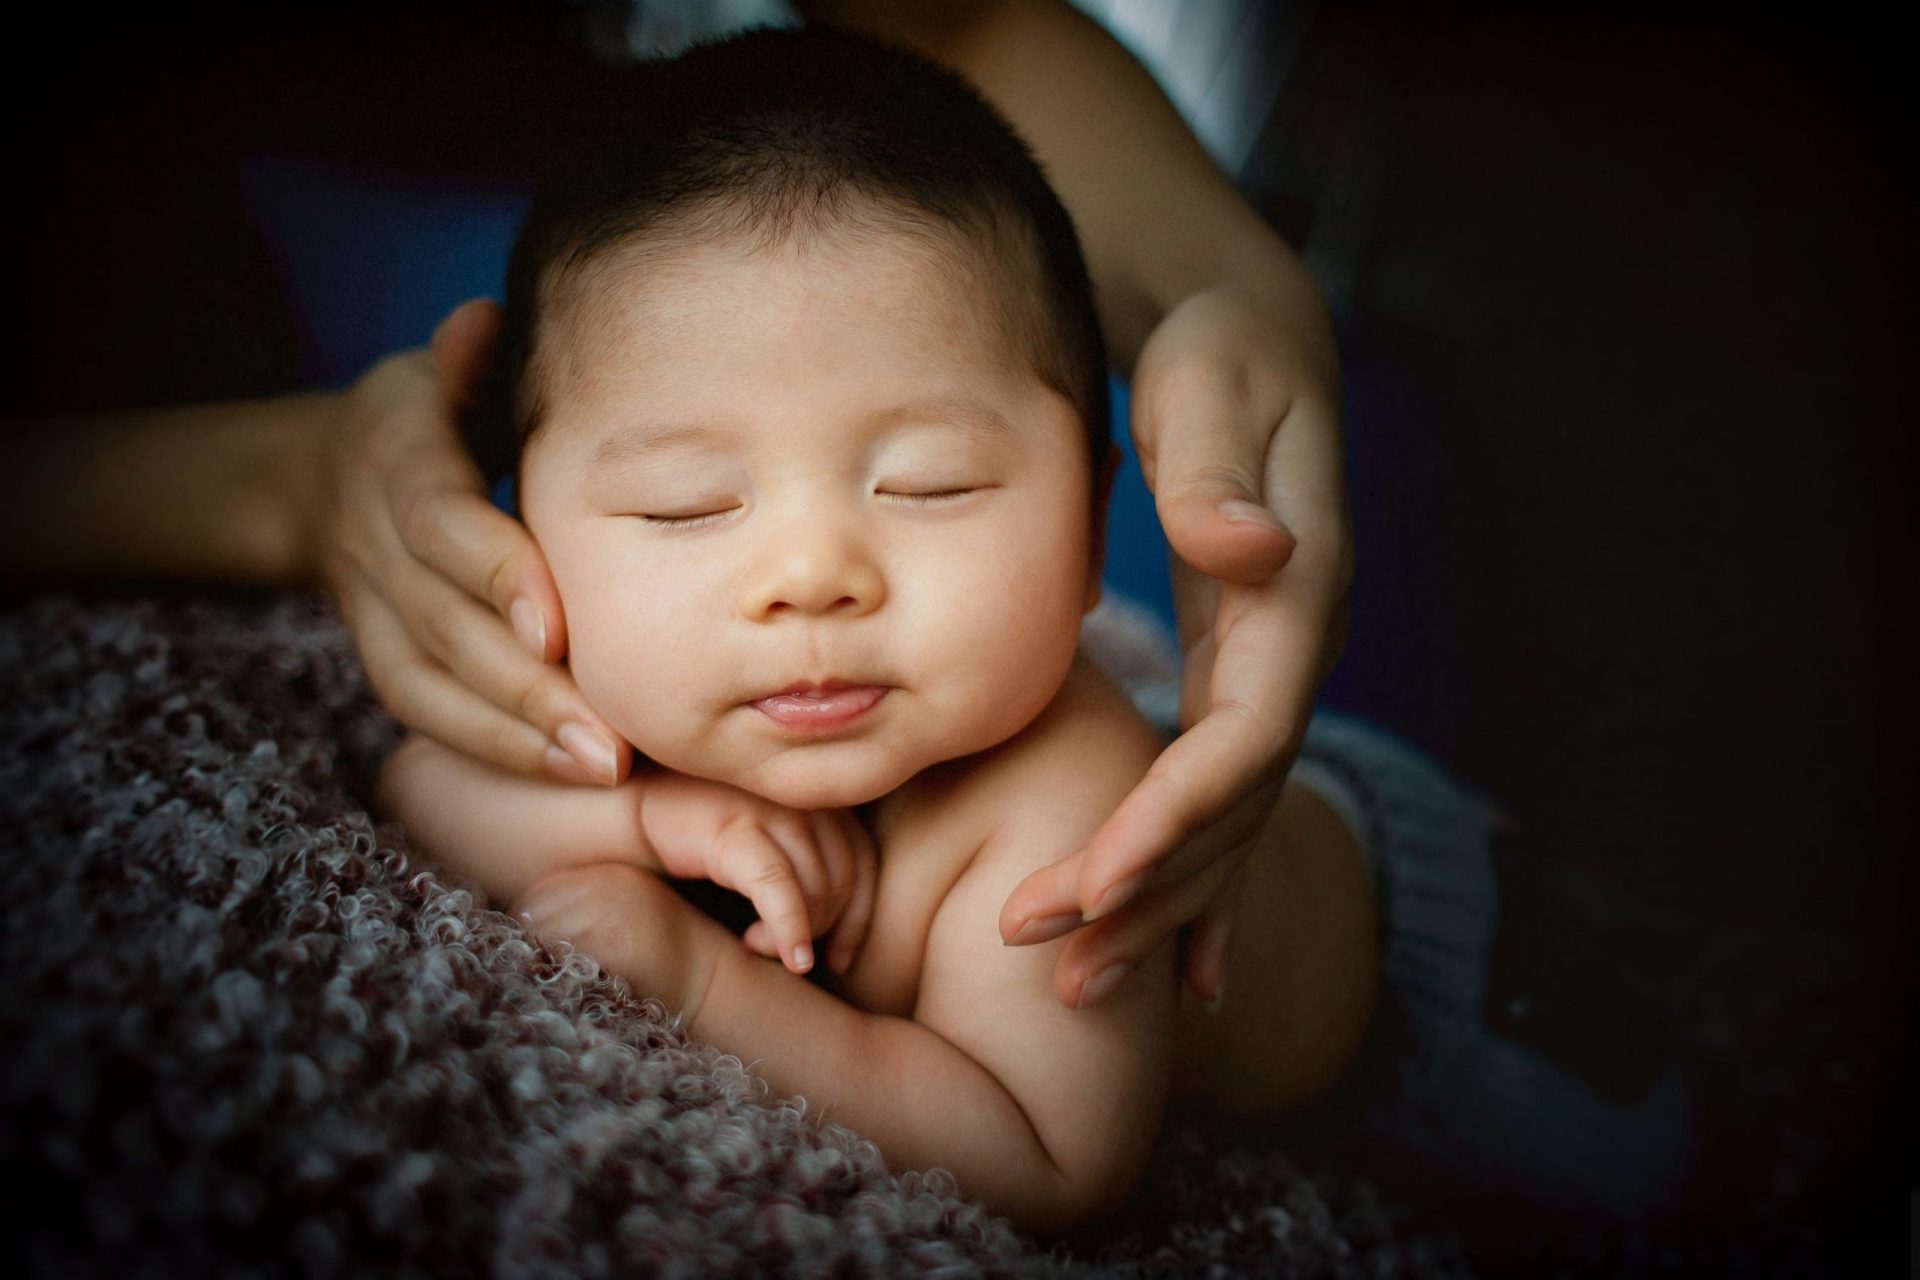 Infant Massage Is Only For Babies… Or Is It?